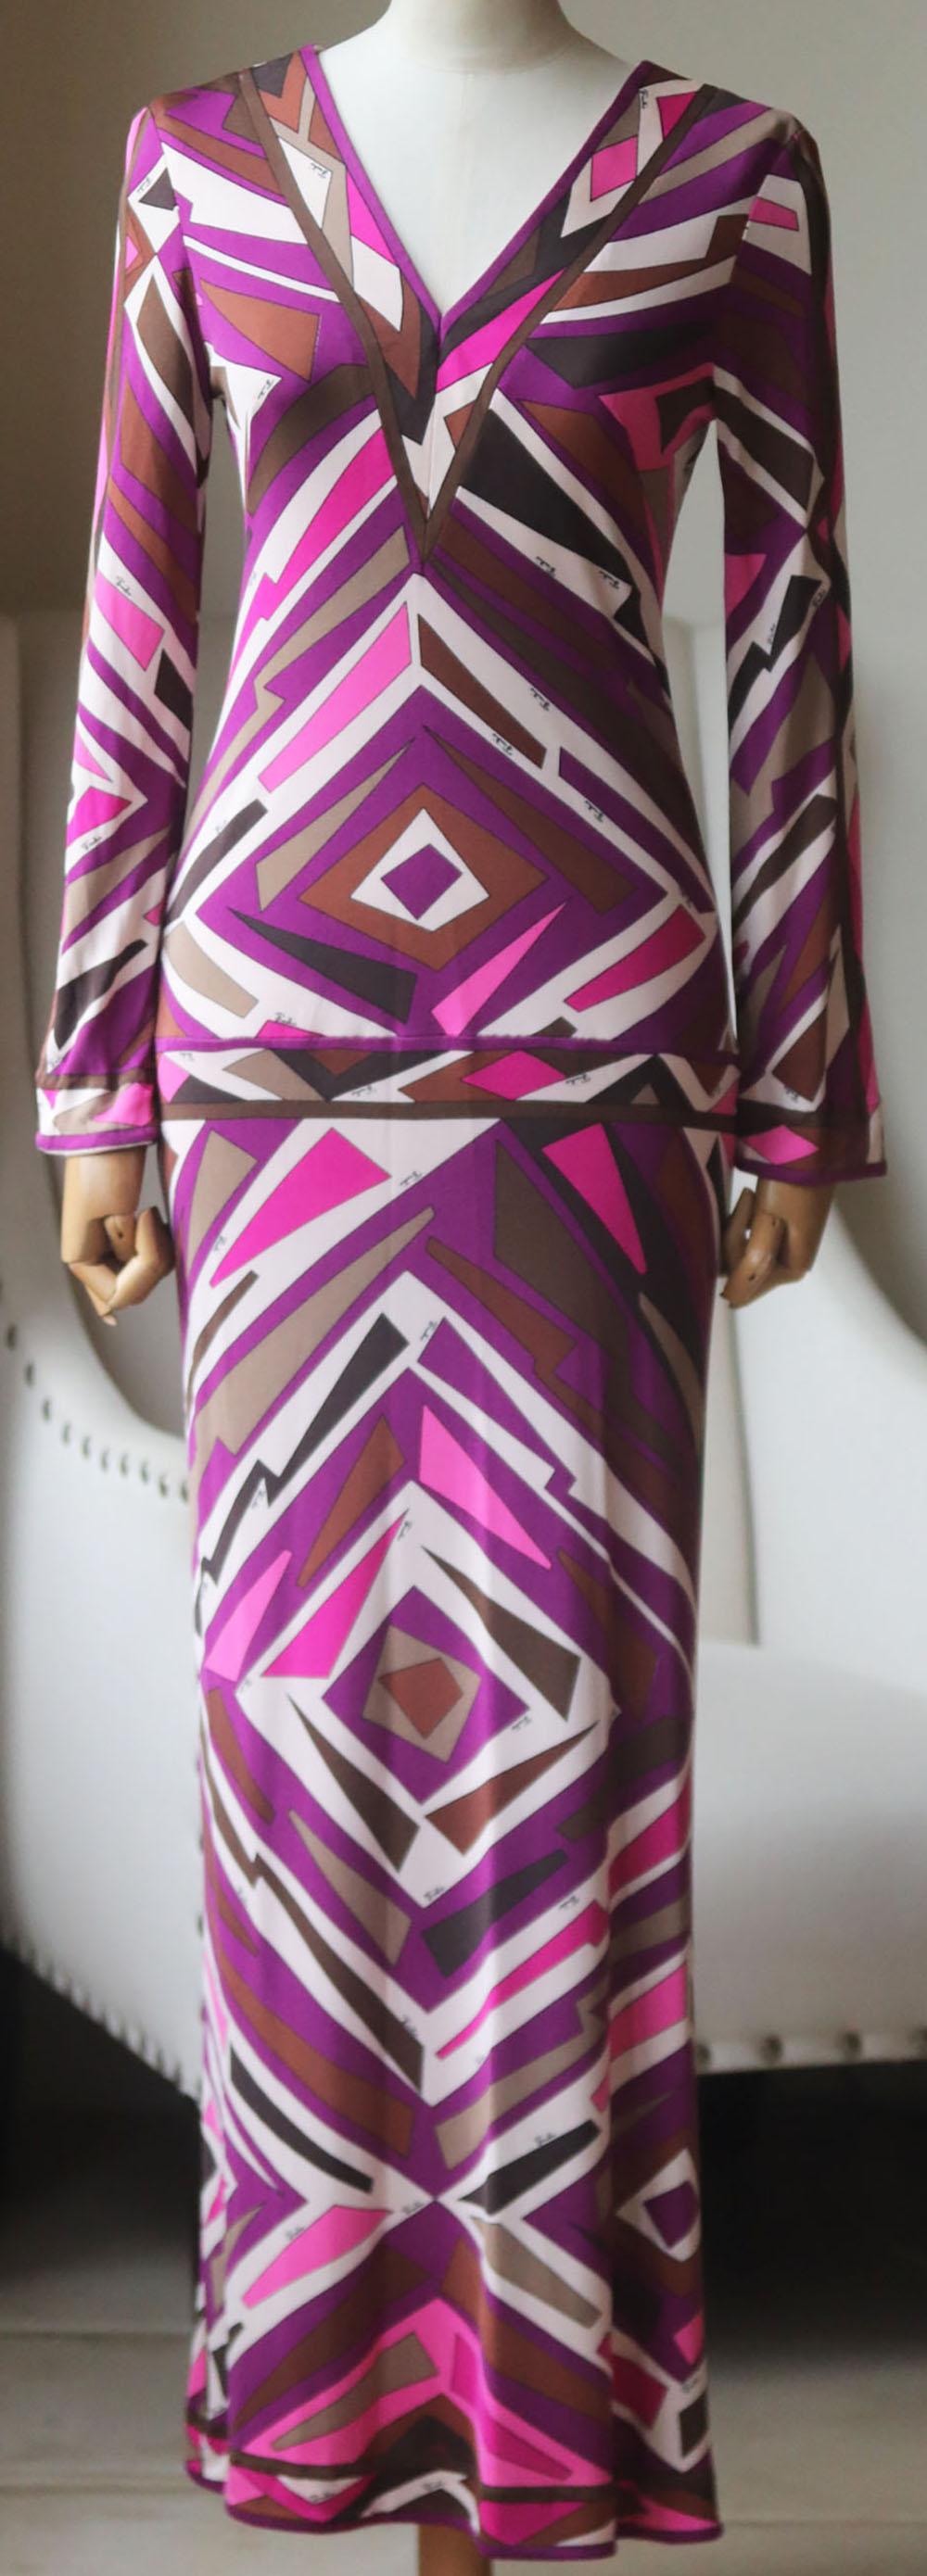 This beautiful dress by Emilio Pucci injects a positive, upbeat attitude into an elegant Vintage piece, this silk dress is made from the brand's iconic geometric-prints.
Multicoloured silk.
Concealed zip fastening at back.
100% Silk.

Size: Small